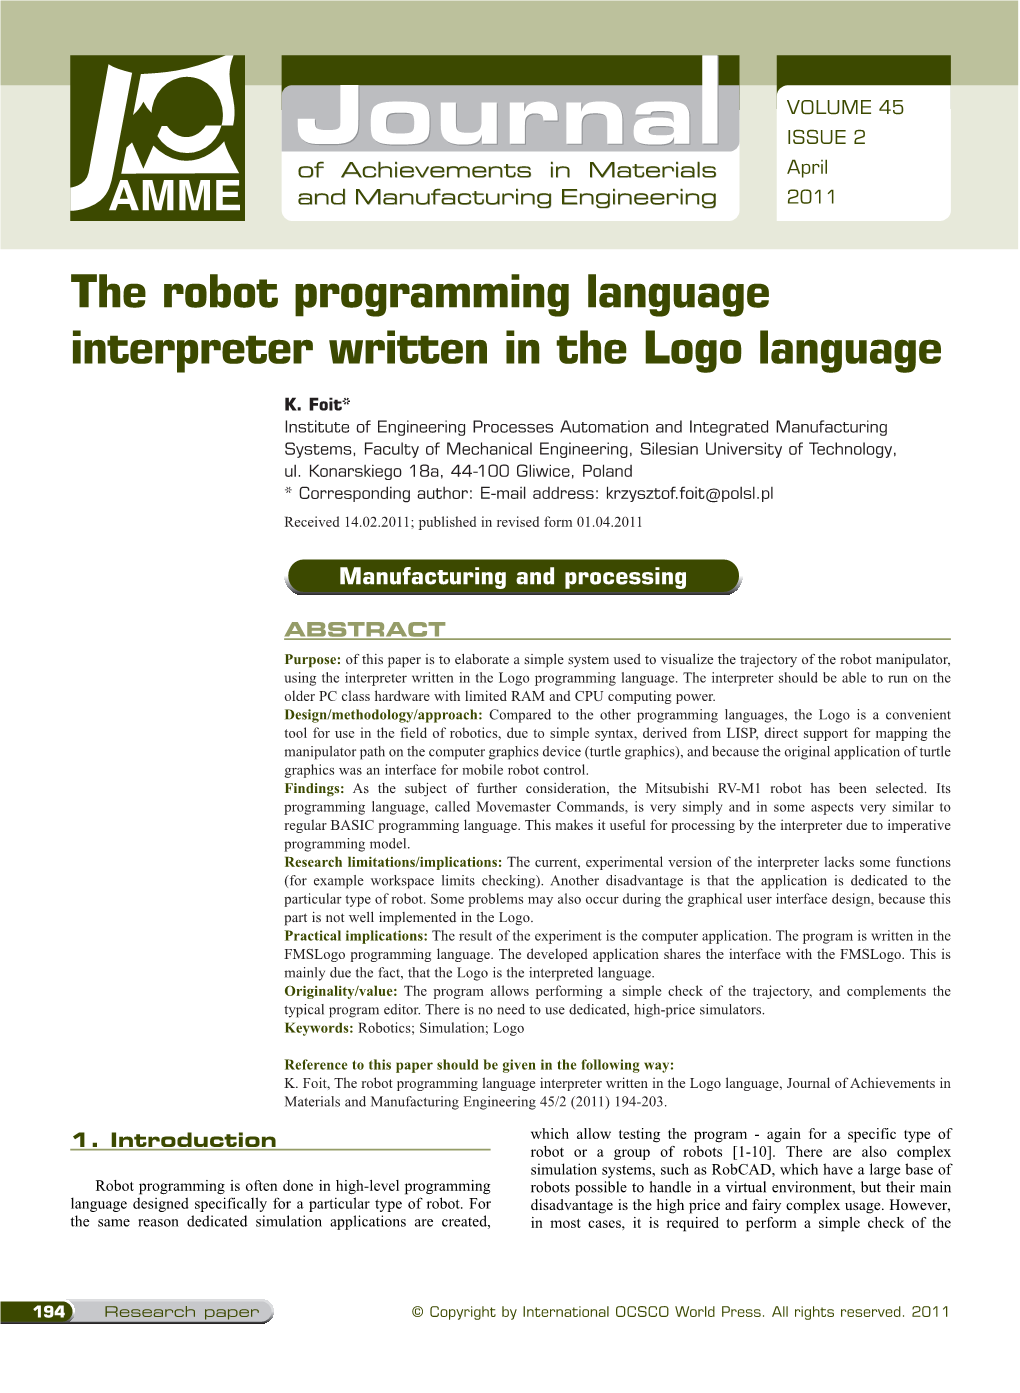 The Robot Programming Language Interpreter Written in the Logo Language, Journal of Achievements in Materials and Manufacturing Engineering 45/2 (2011) 194-203